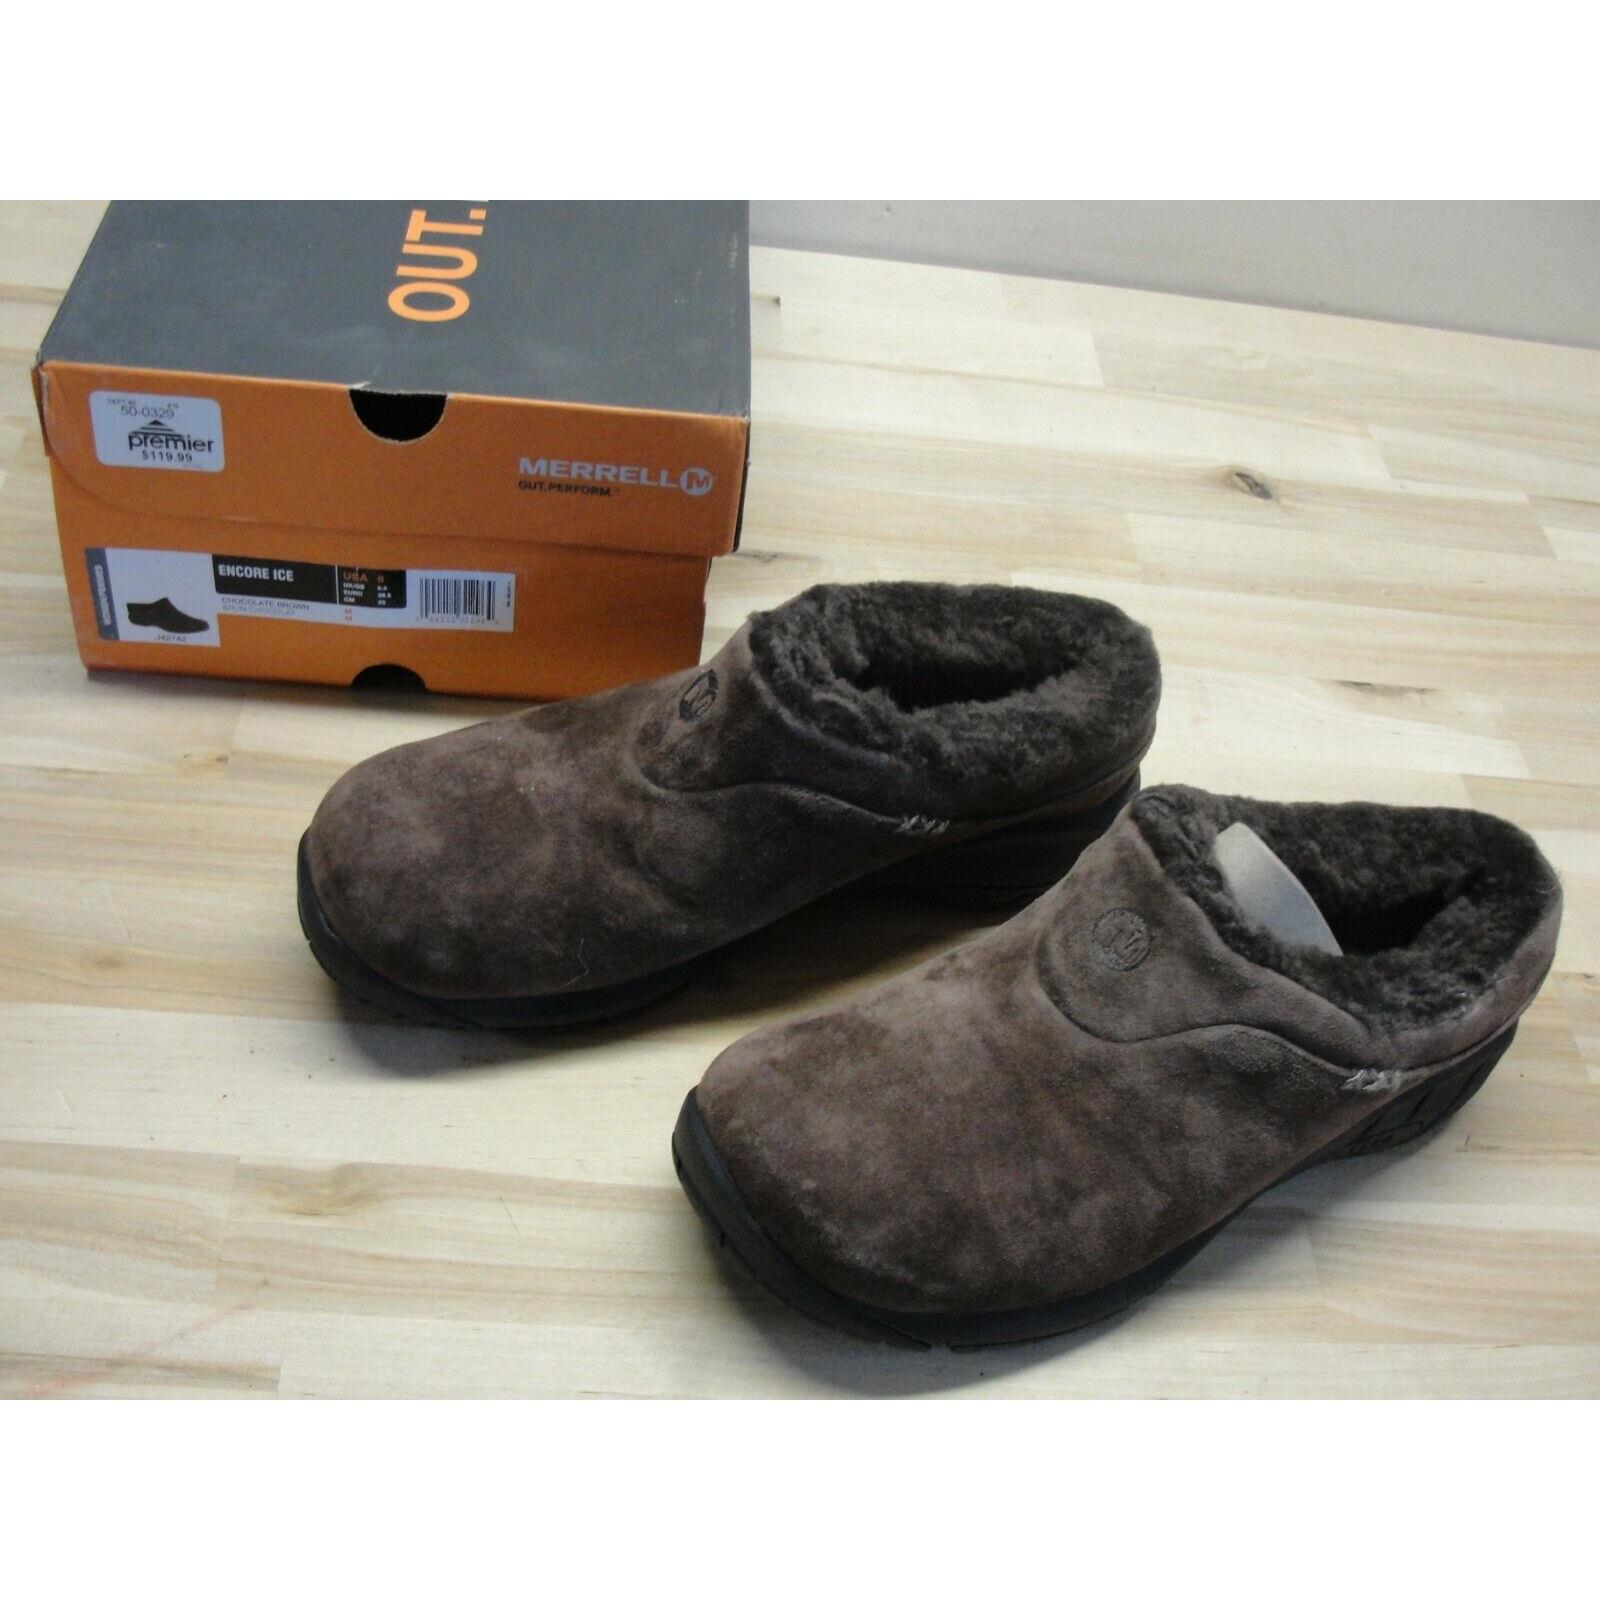 Merrell Encore Ice Slip ON Women`s Shoes Size 8 Chocolate Brown